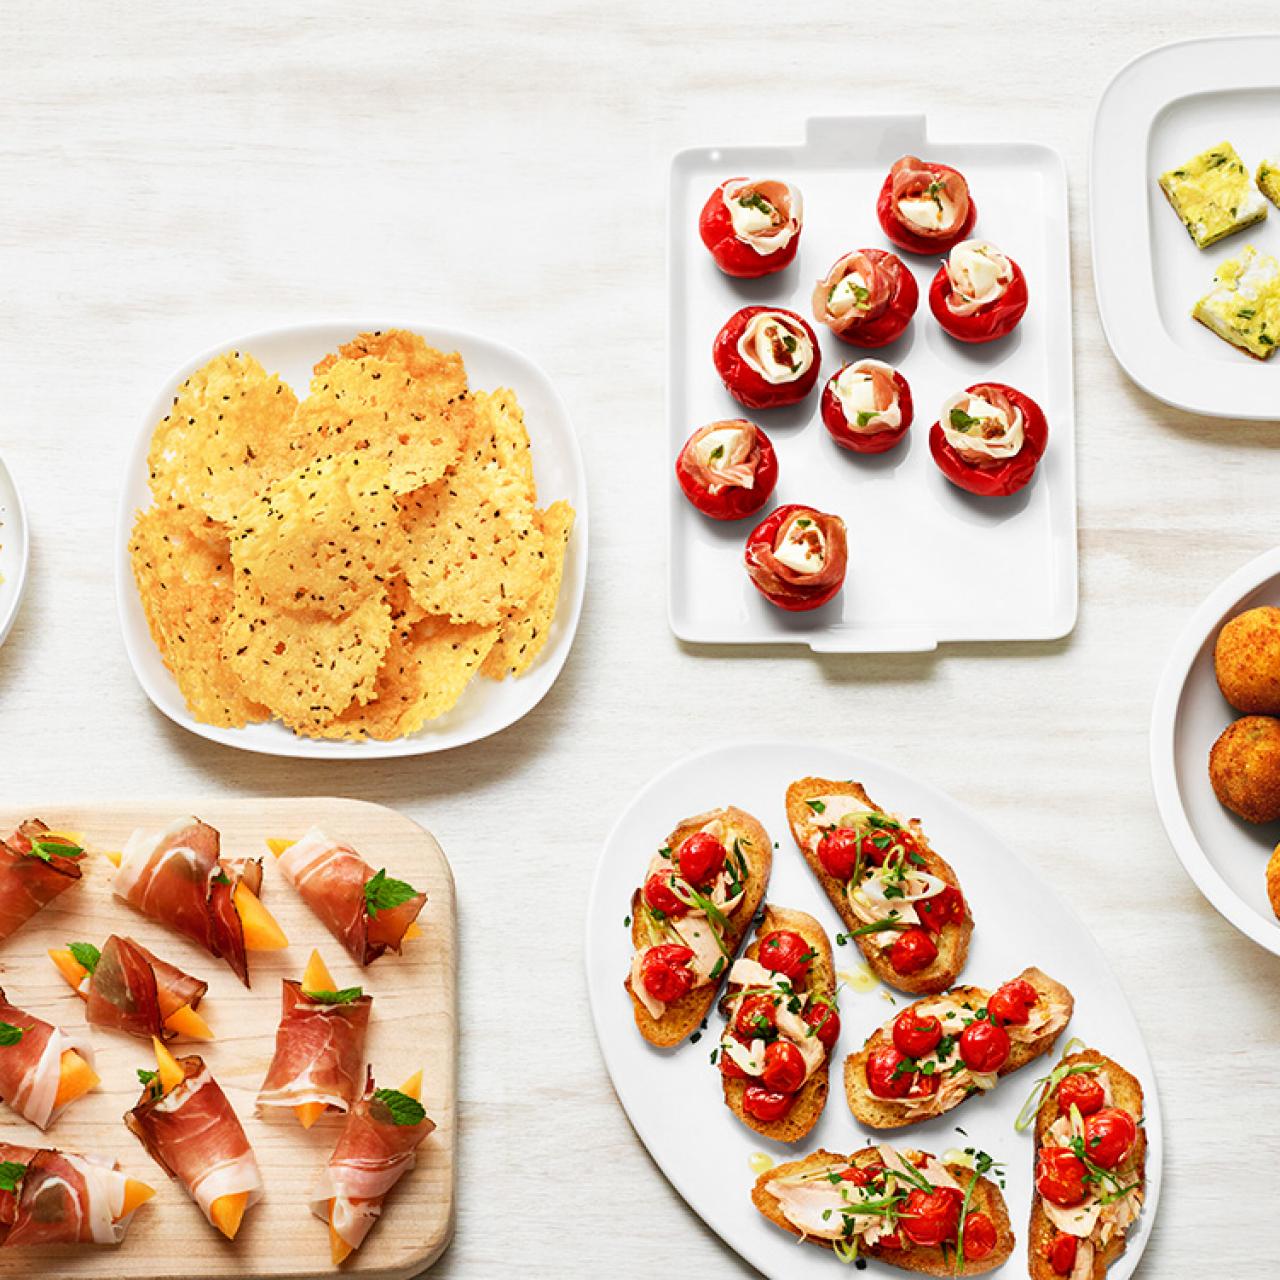 50 Antipasti Food | Ideas Recipes, Network | Easy Meal and Dinners